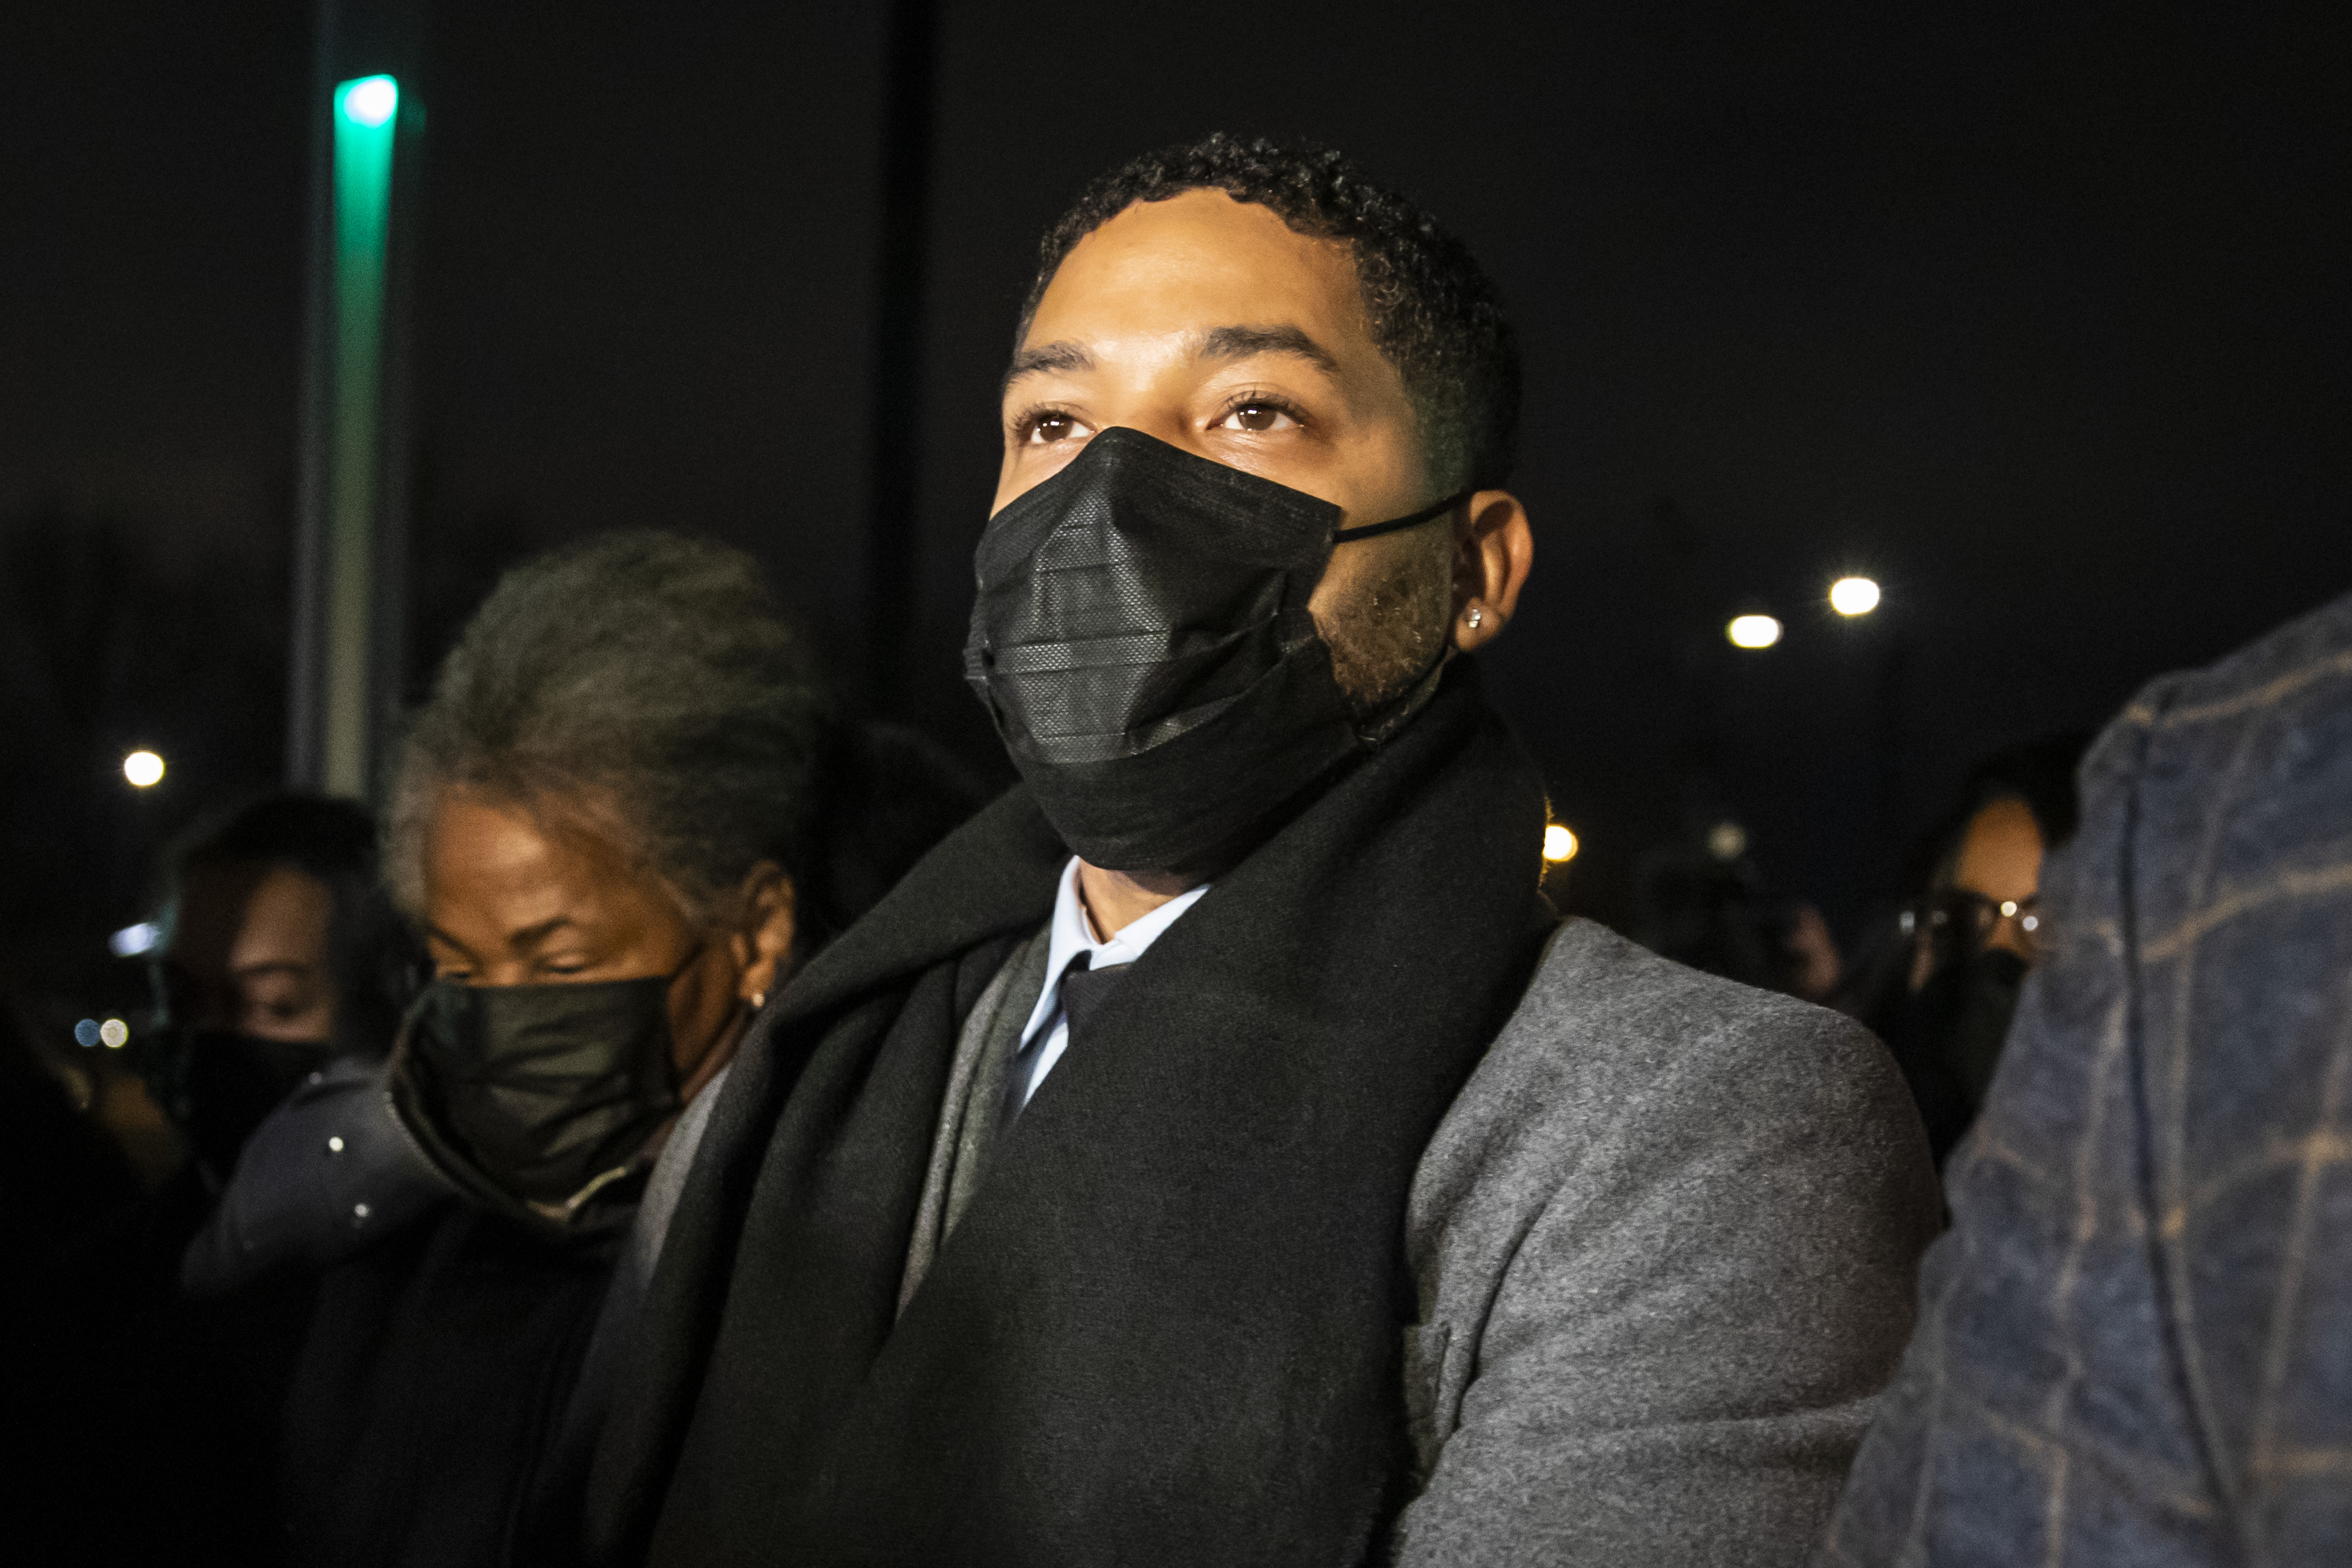 Flanked by family members, supporters, attorneys and bodyguards, former “Empire” star Jussie Smollett walks into the Leighton Criminal Courthouse after the jury reached a verdict on Dec. 9.